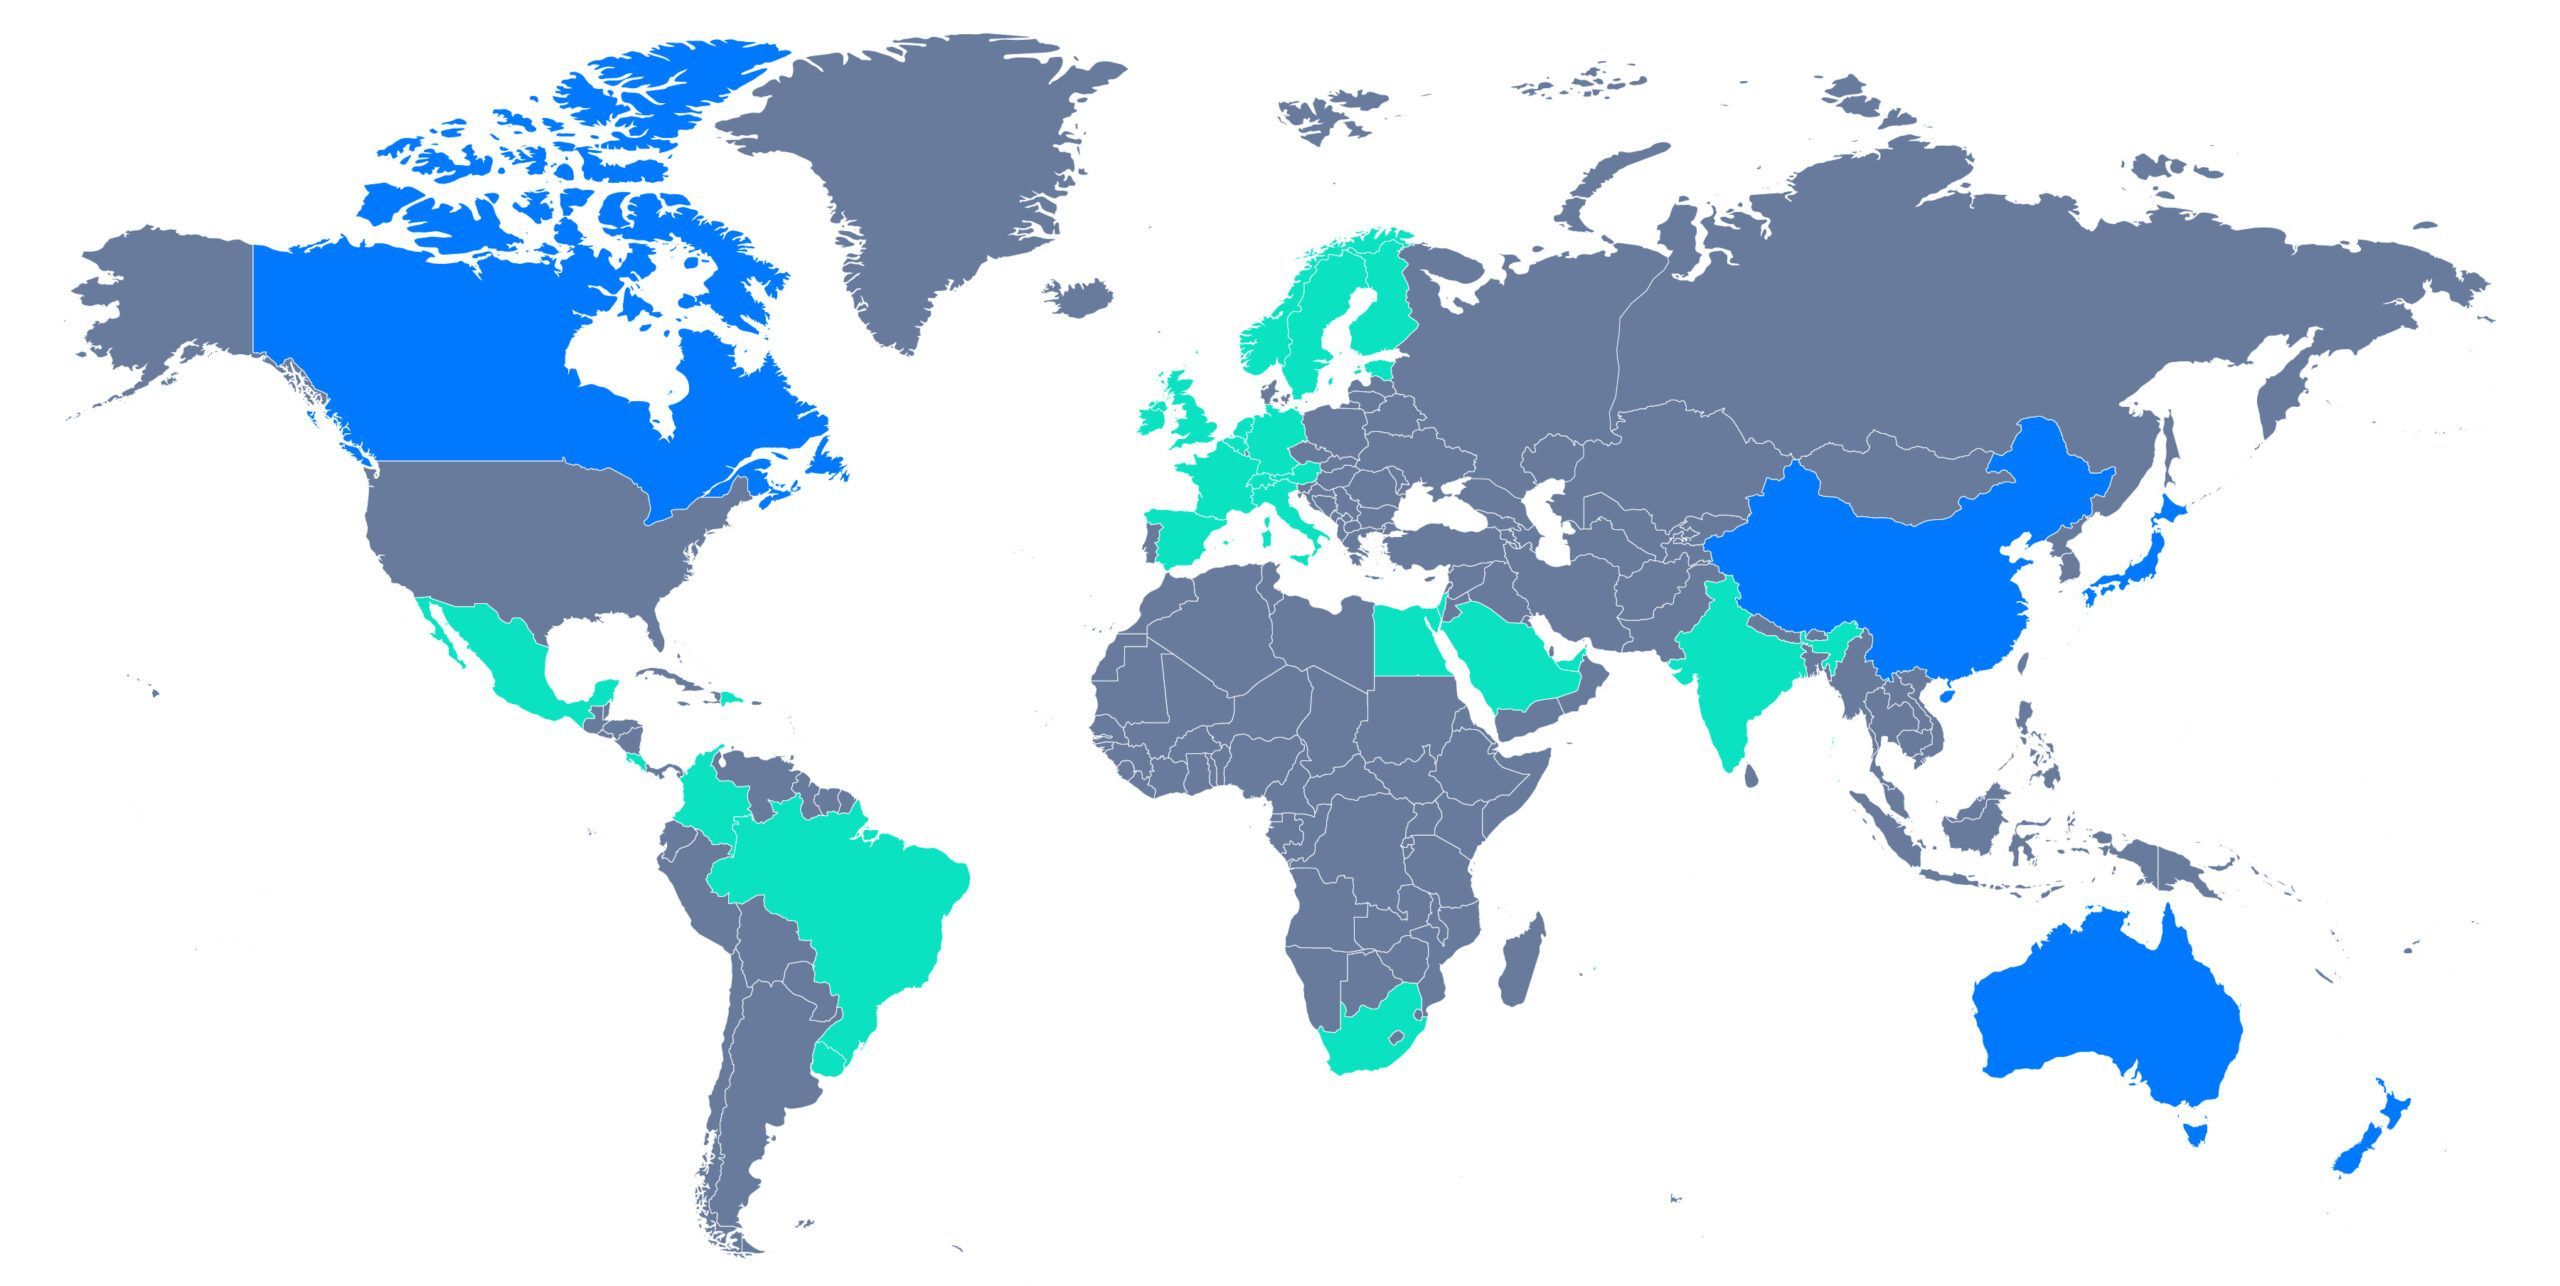 World map highlighting specific countries in different colors to indicate sales territories, with a focus on regions like North America, South America, and parts of Europe and Asia.